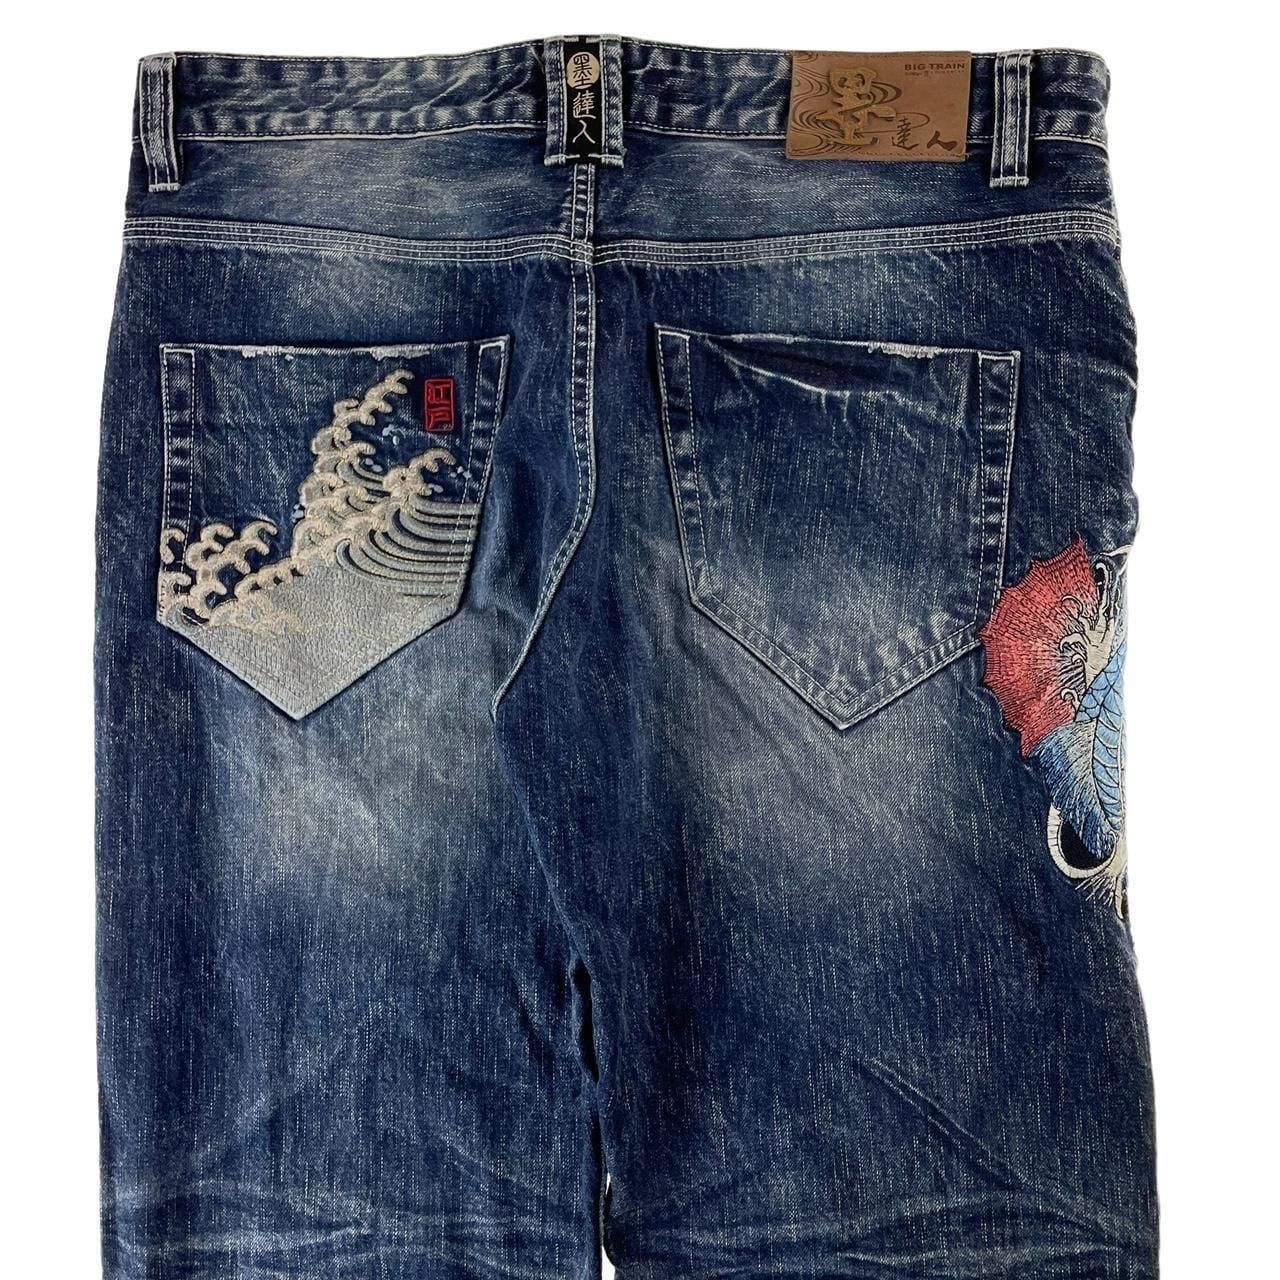 Vintage Koi fish and Waves big train Japanese denim jeans trousers W38 - Known Source